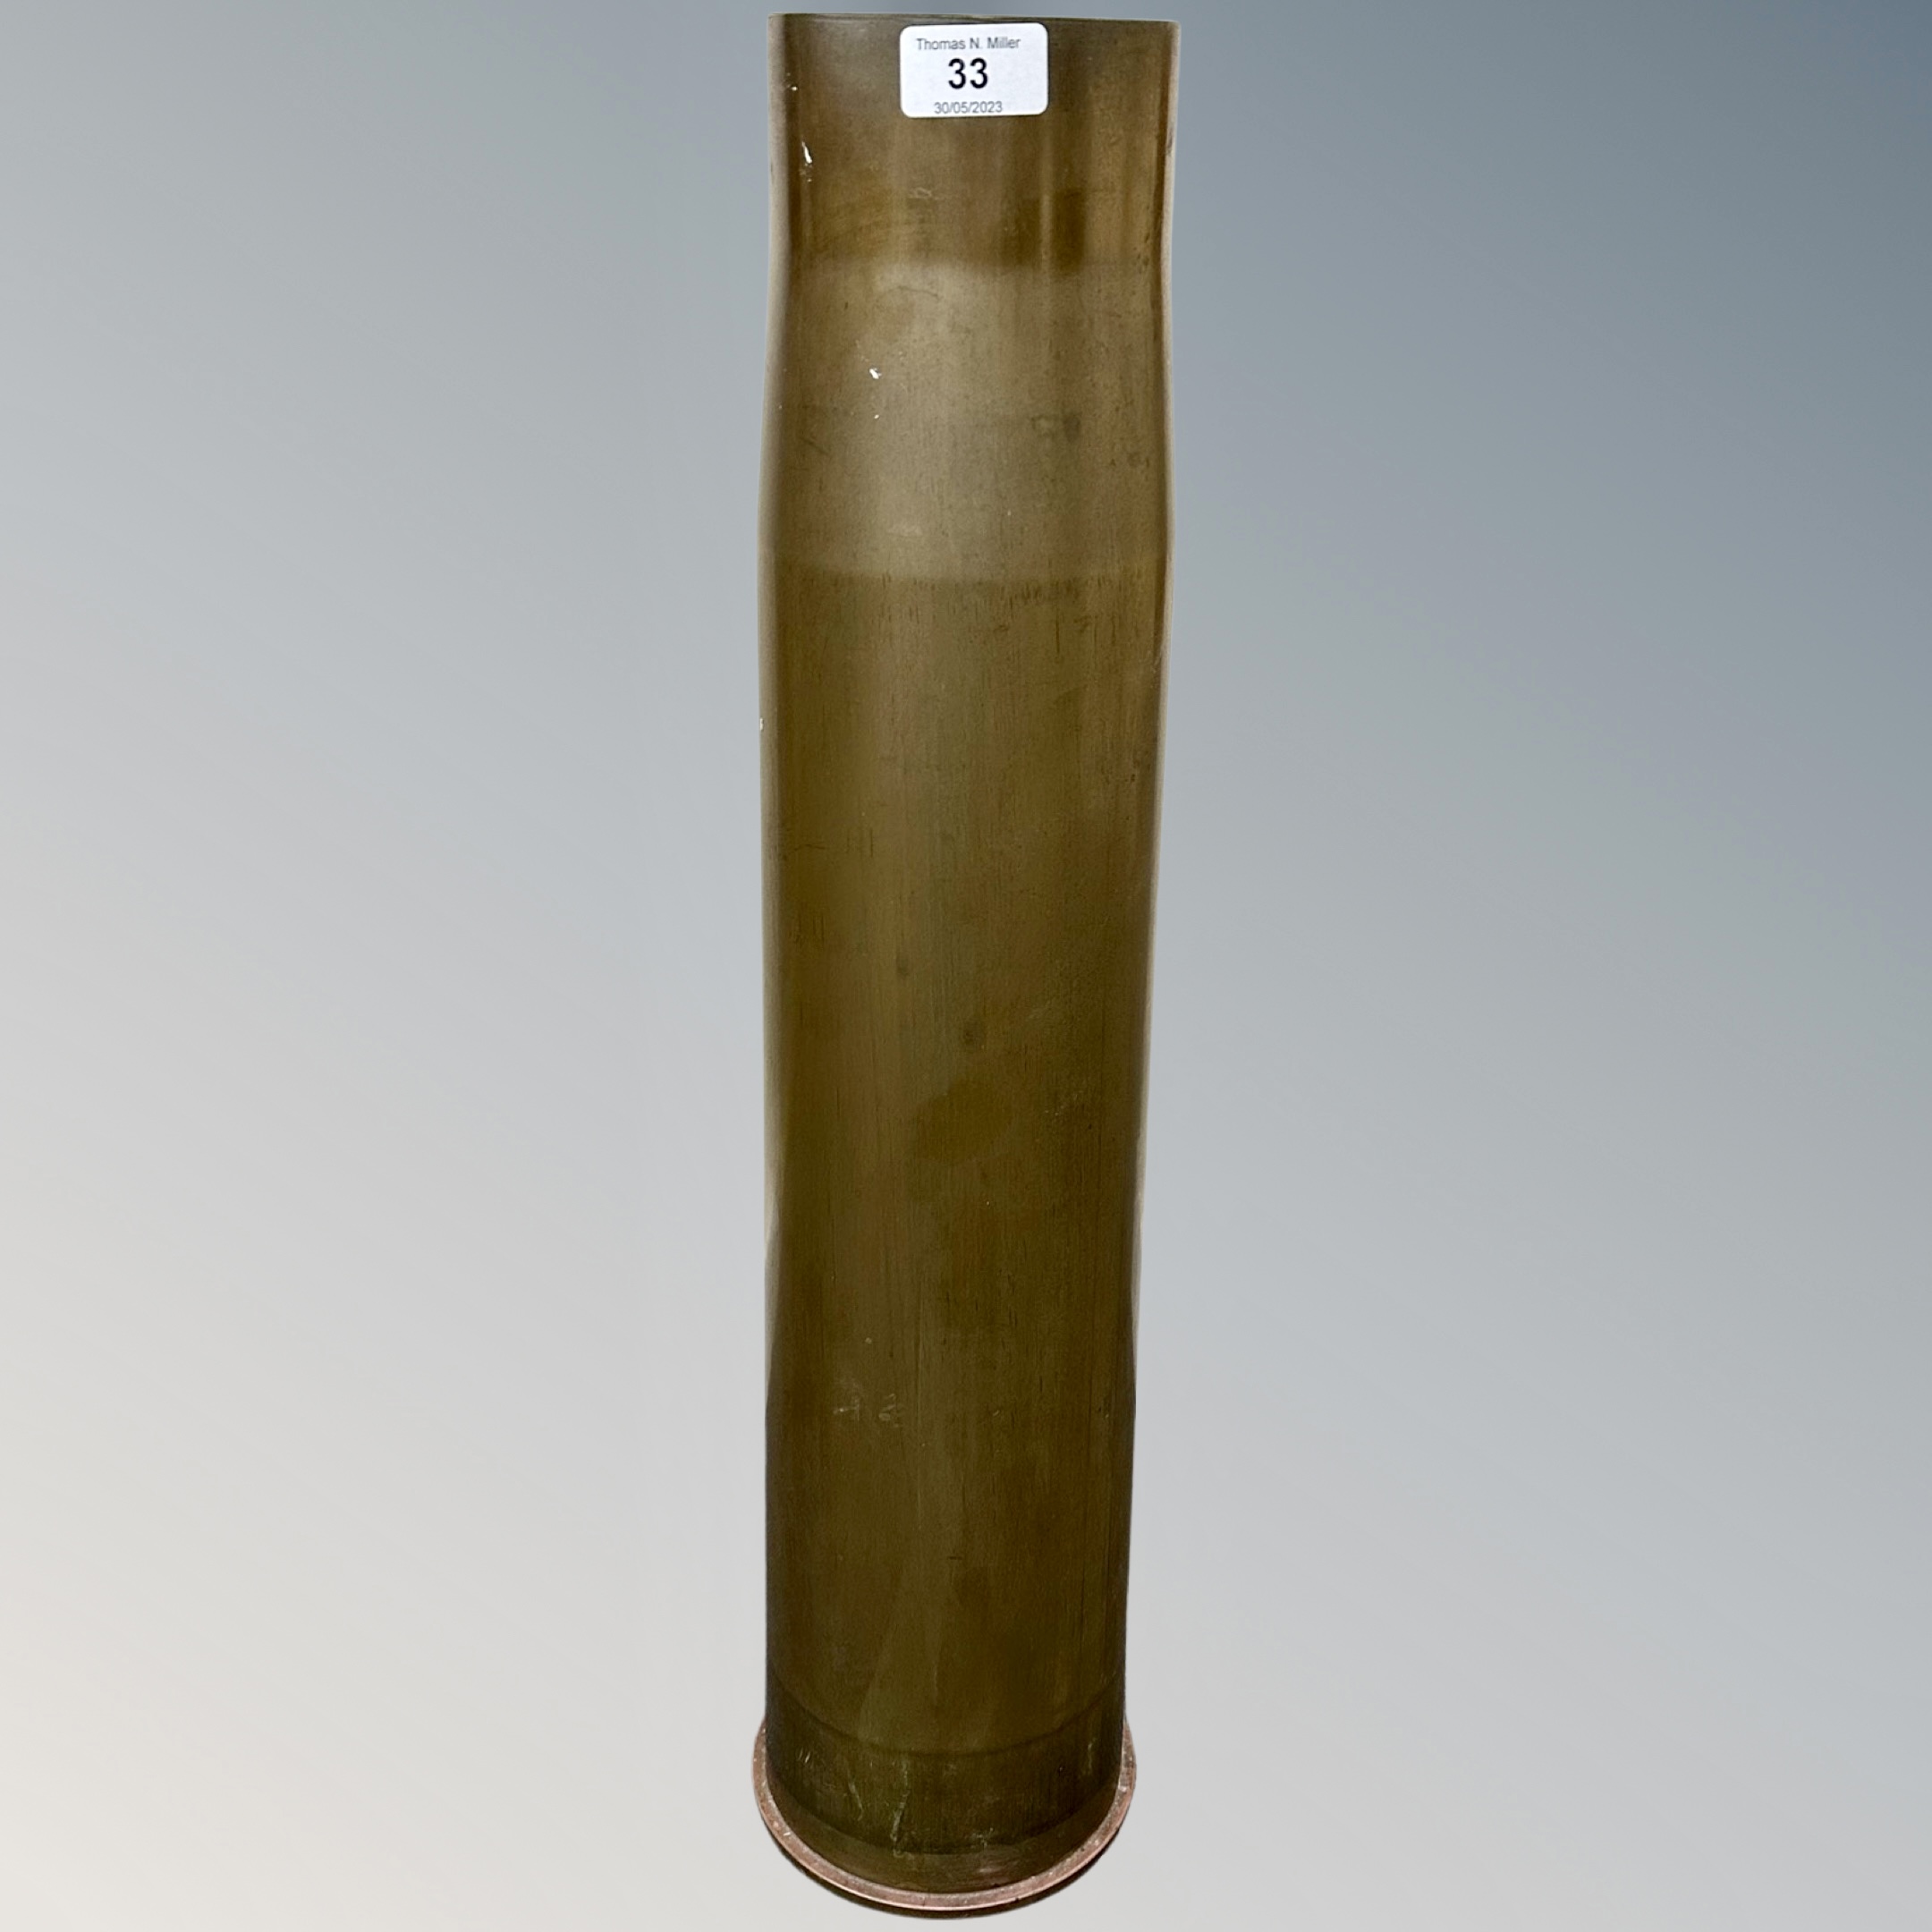 A heavy artillery brass ammunition shell casing, various engraved markings to base,